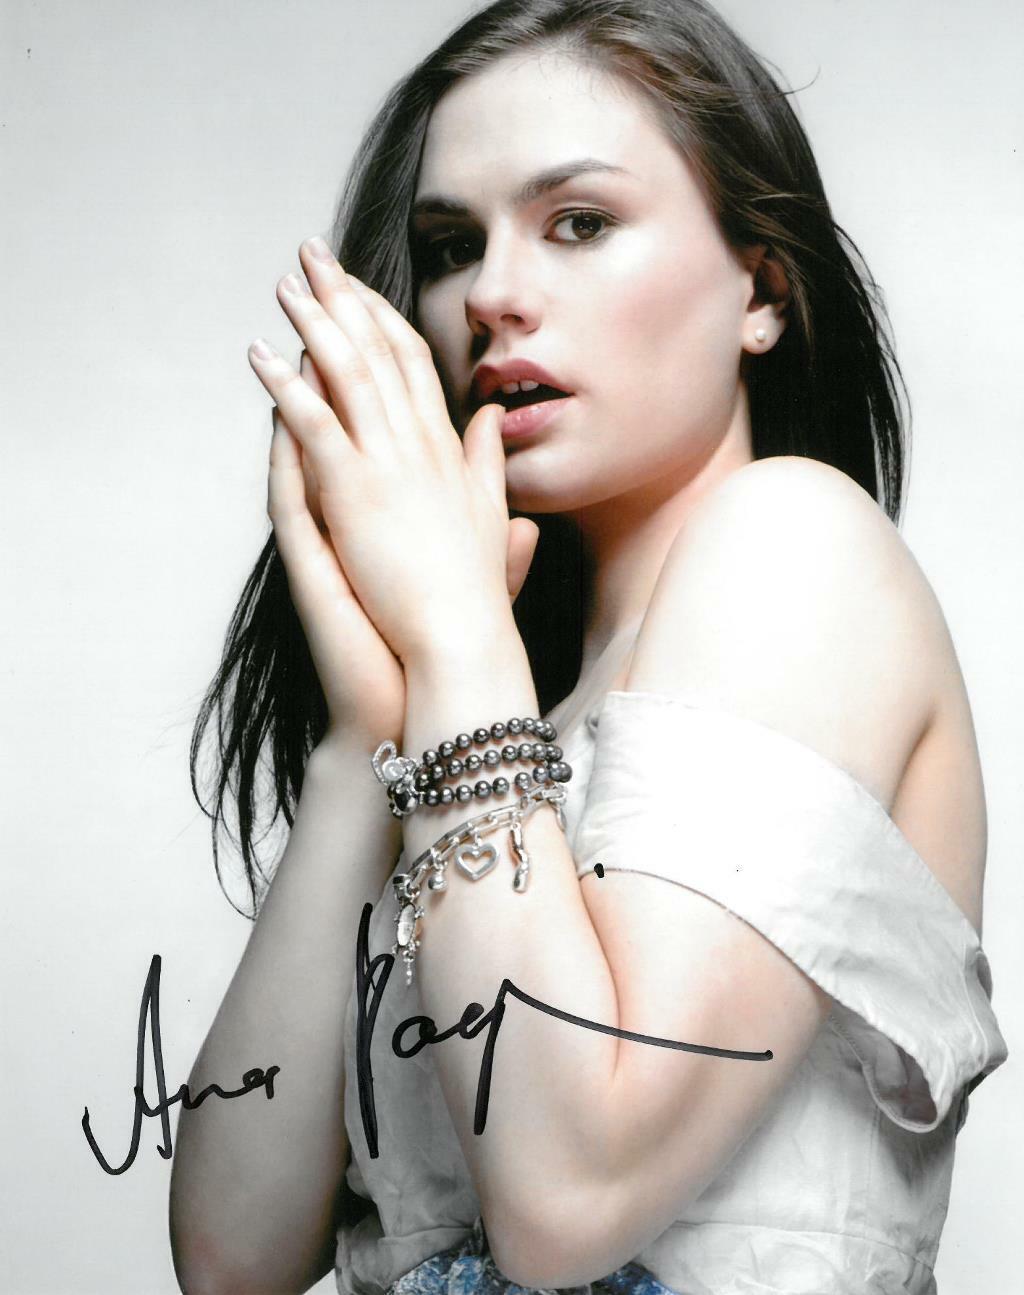 Anna Paquin Signed Authentic Autographed 8x10 Photo Poster painting PSA/DNA #AF21625